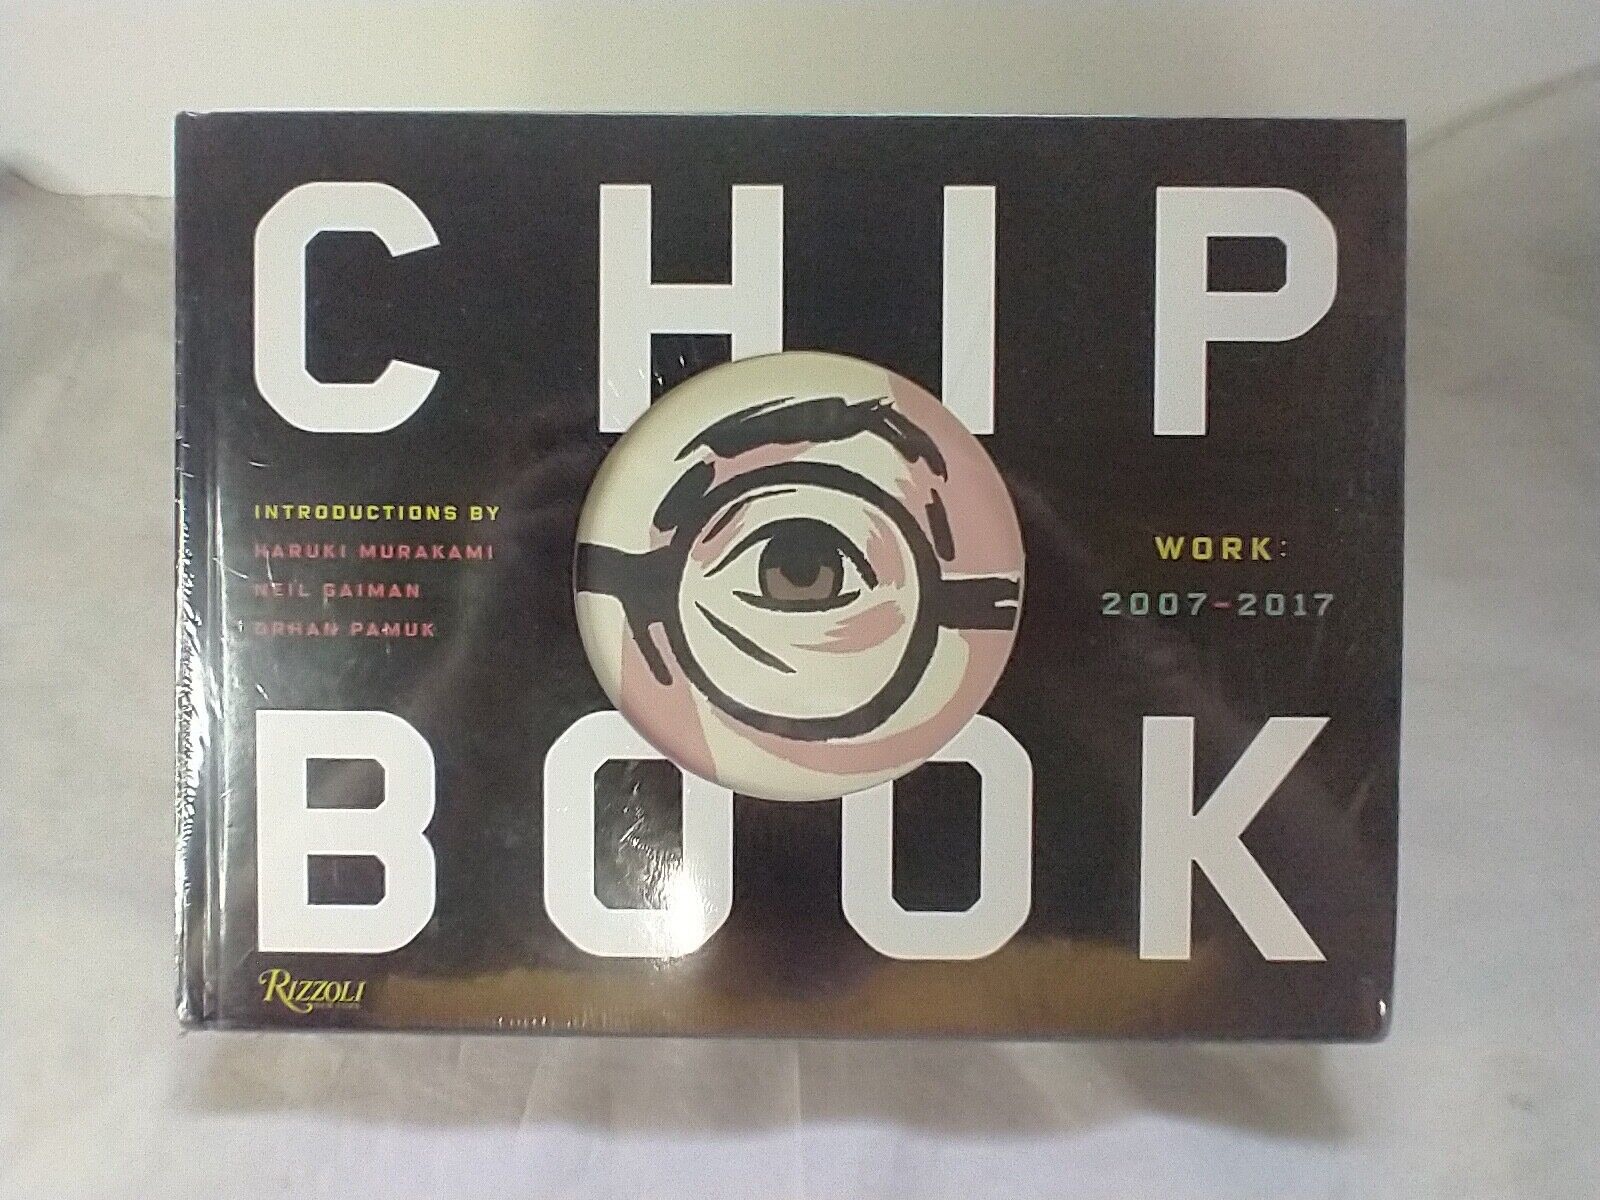 Chip Kidd Book Two Hardcover New Sealed Unopened